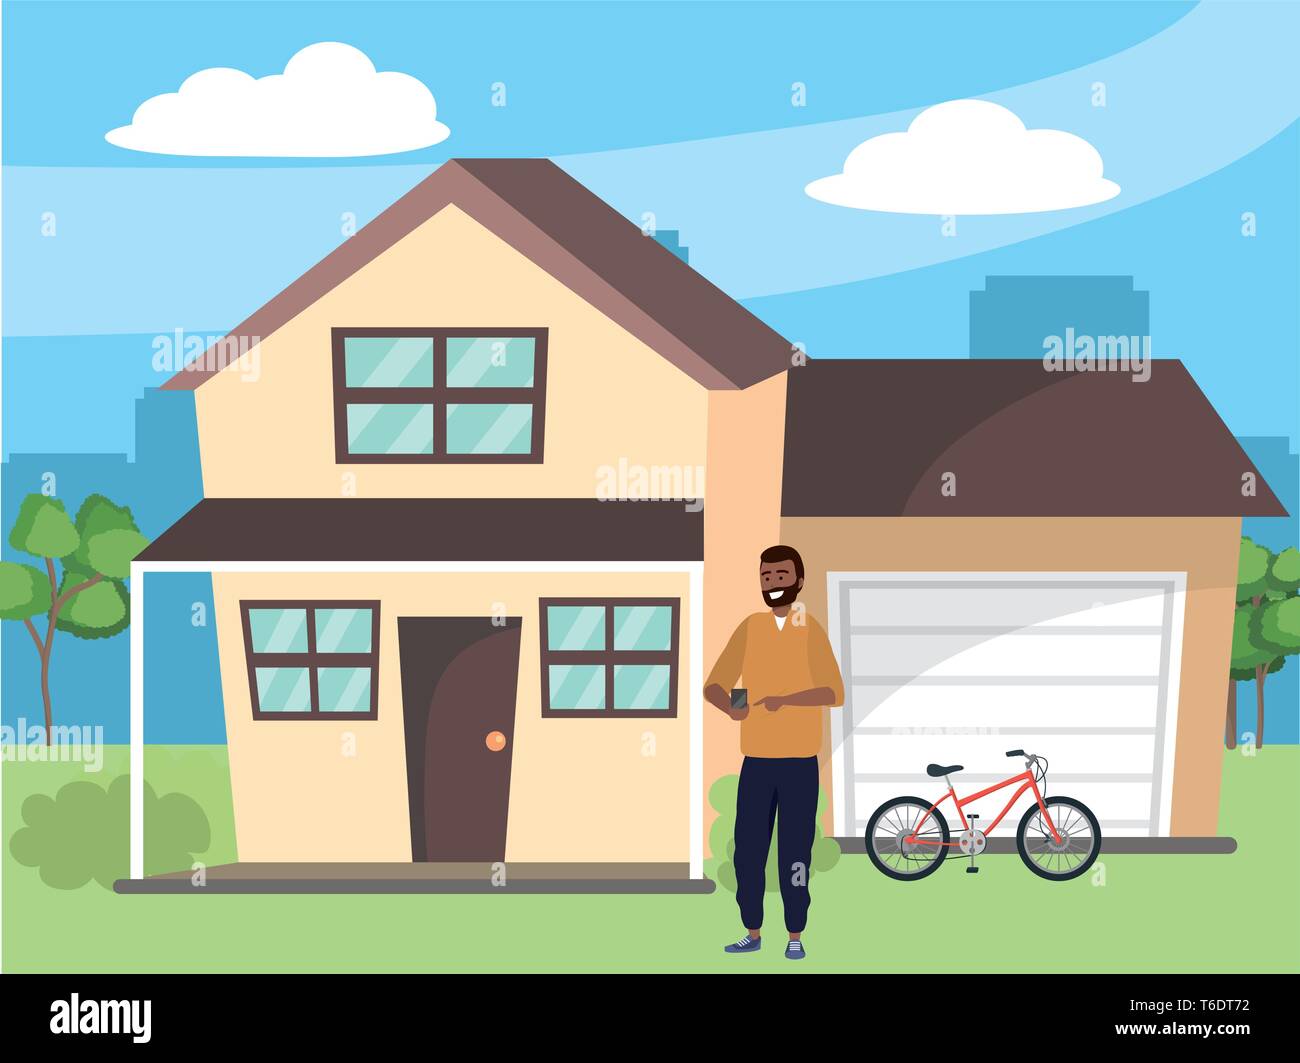 Millennial using smartphone browsing texting suburban house garage bicycle afro beard background vector illustration graphic design Stock Vector